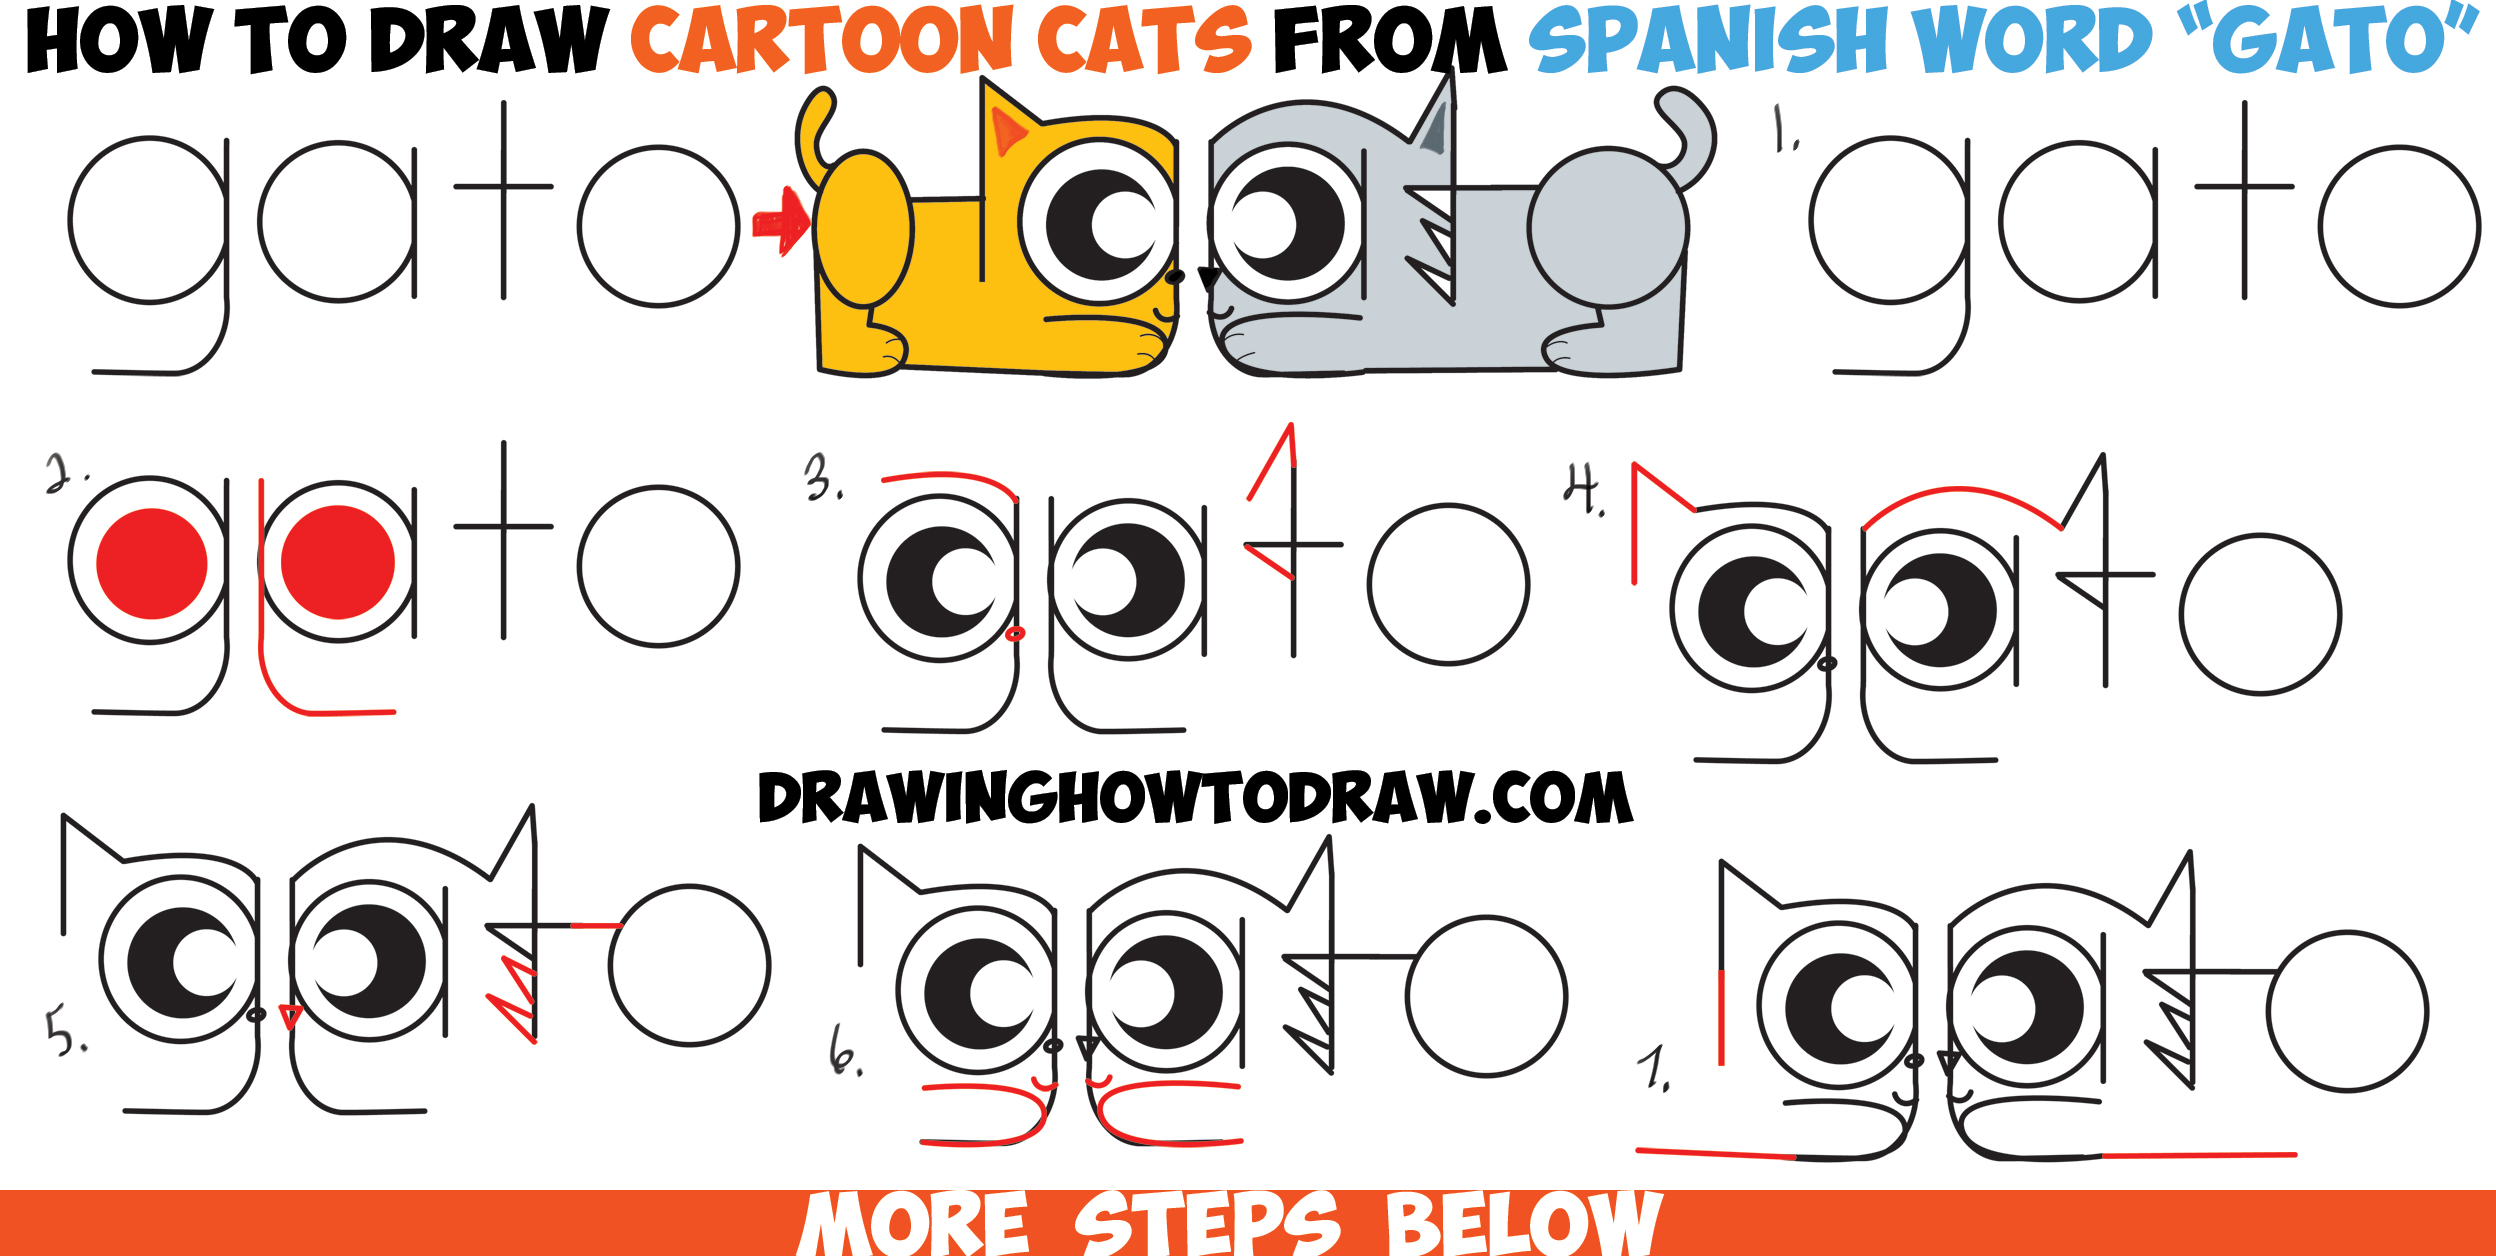 How to Draw Cartoon Cats from the Spanish Word Gato - Easy Step by Step Drawing Tutorial for Kids